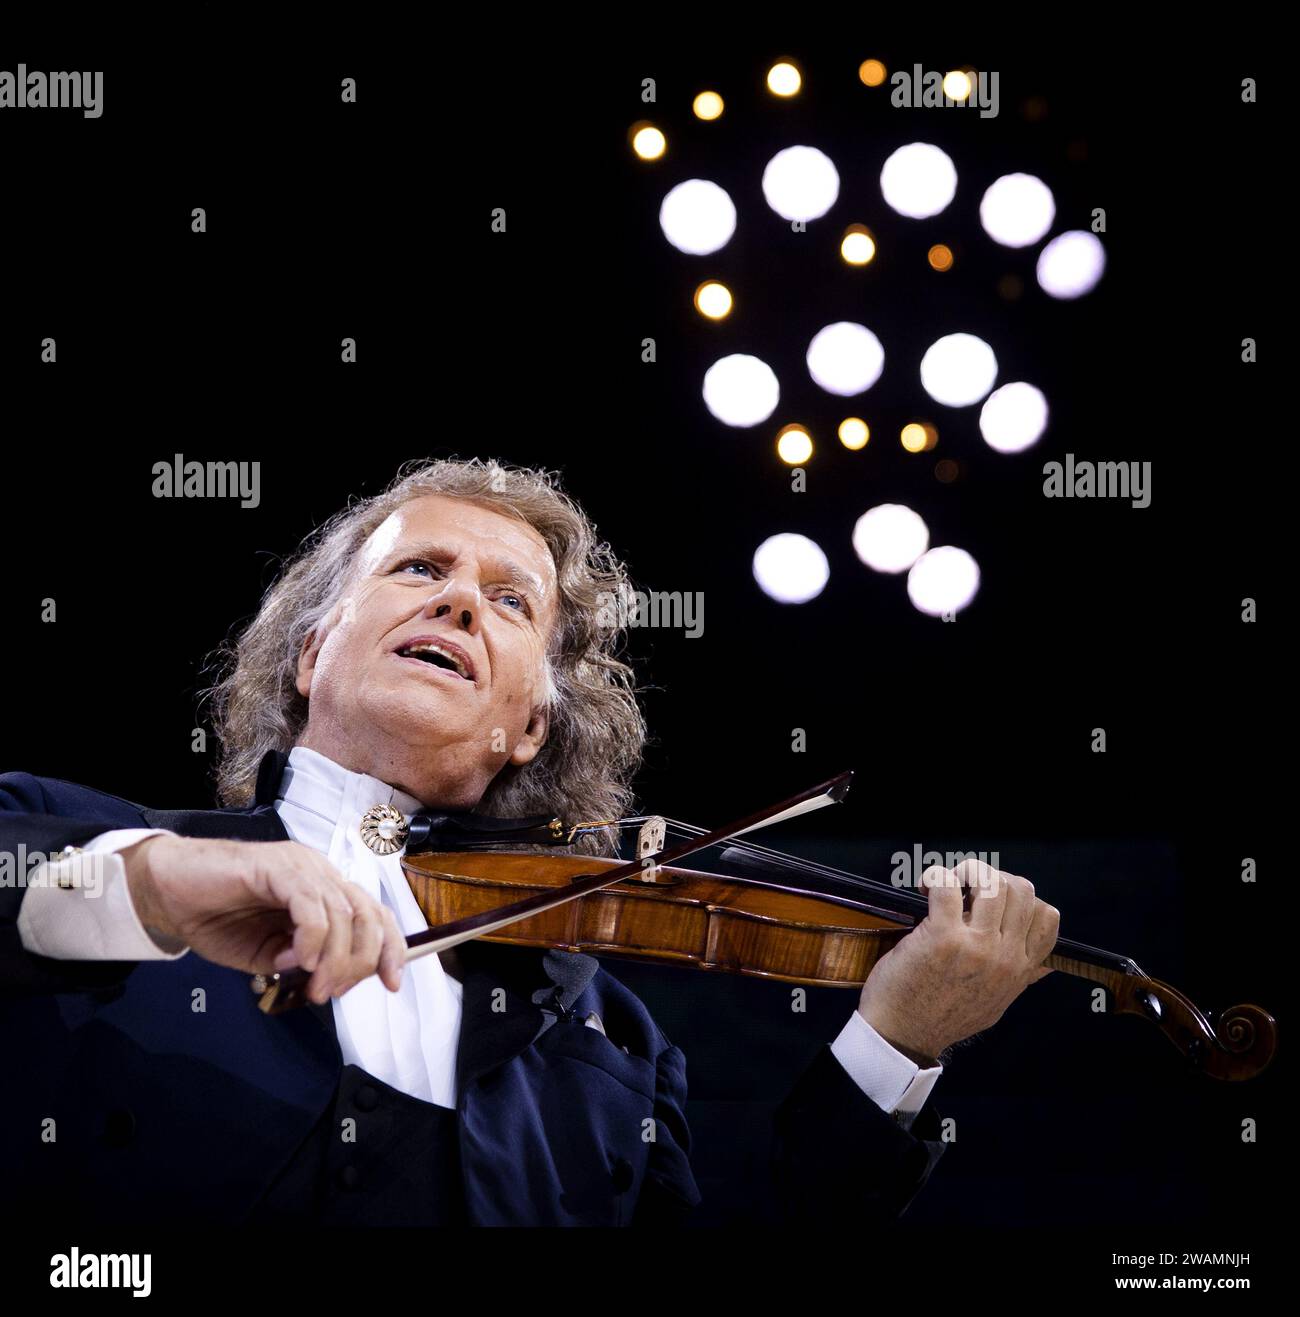 AMSTERDAM - Violinist Andre Rieu during a New Year's concert in the Ziggo Dome. ANP RAMON VAN FLYMEN netherlands out - belgium out Stock Photo